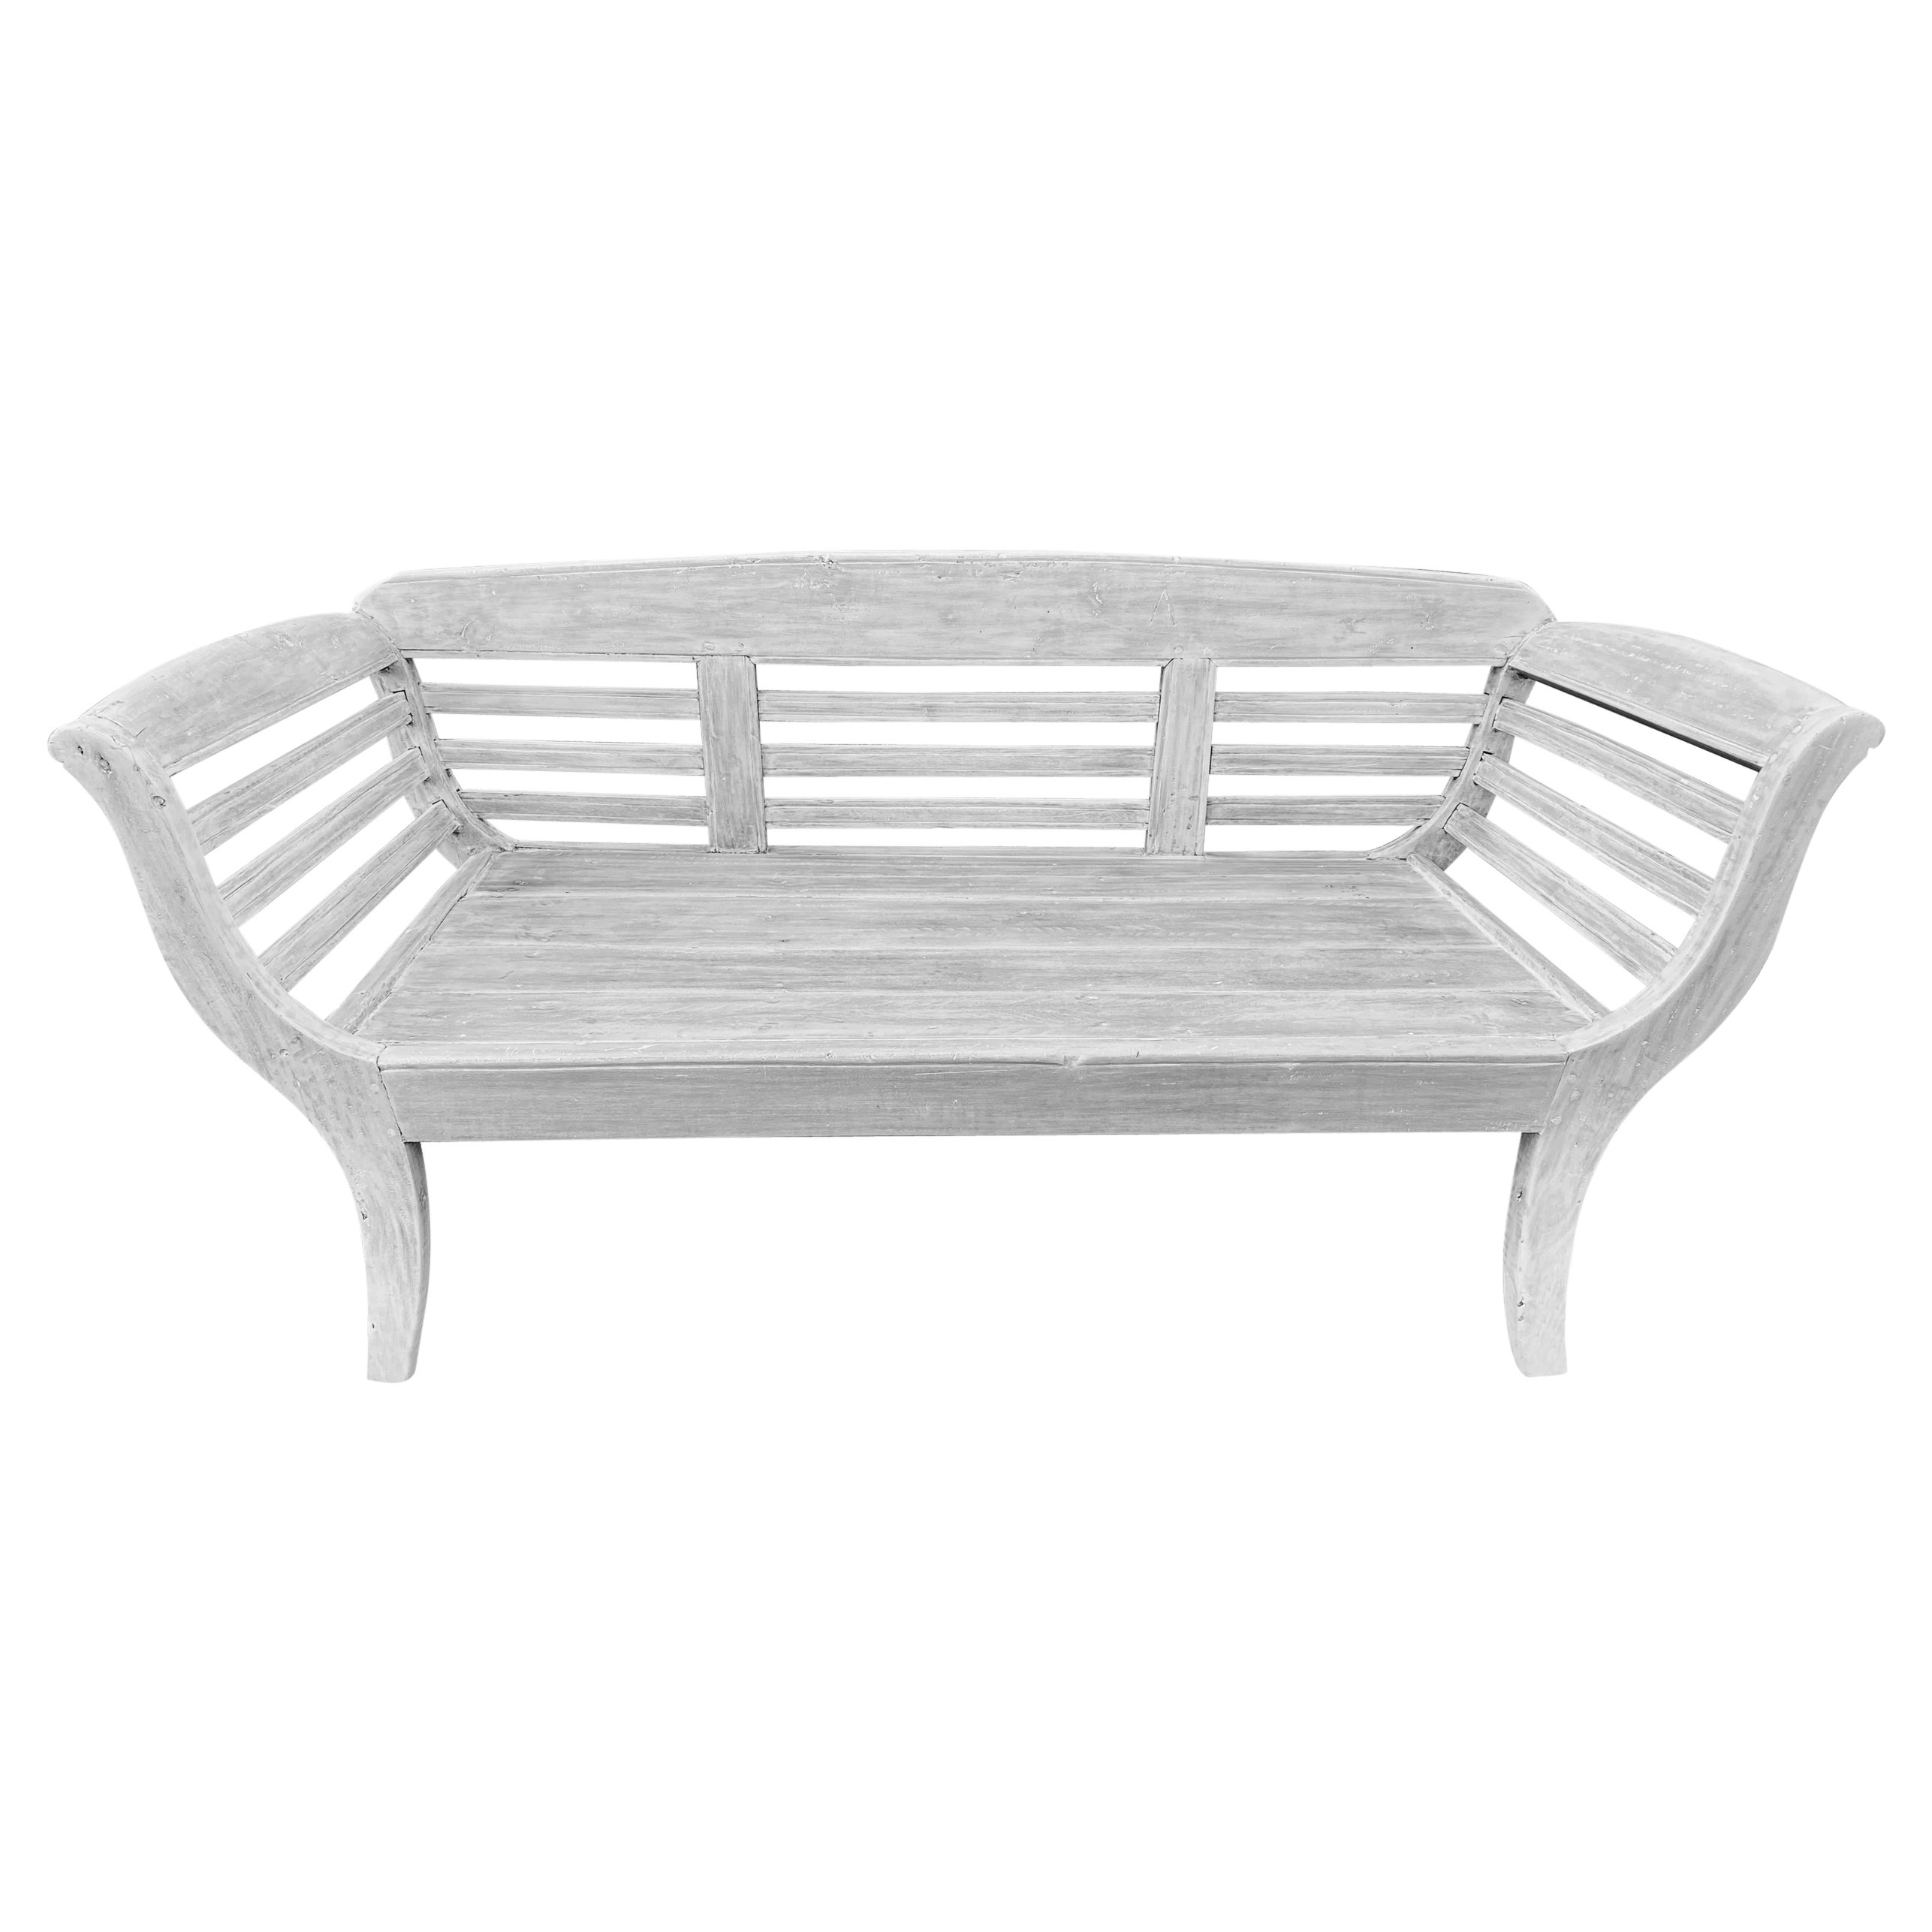 Antique White Washed Teak Settee or Bench with Slatted Back